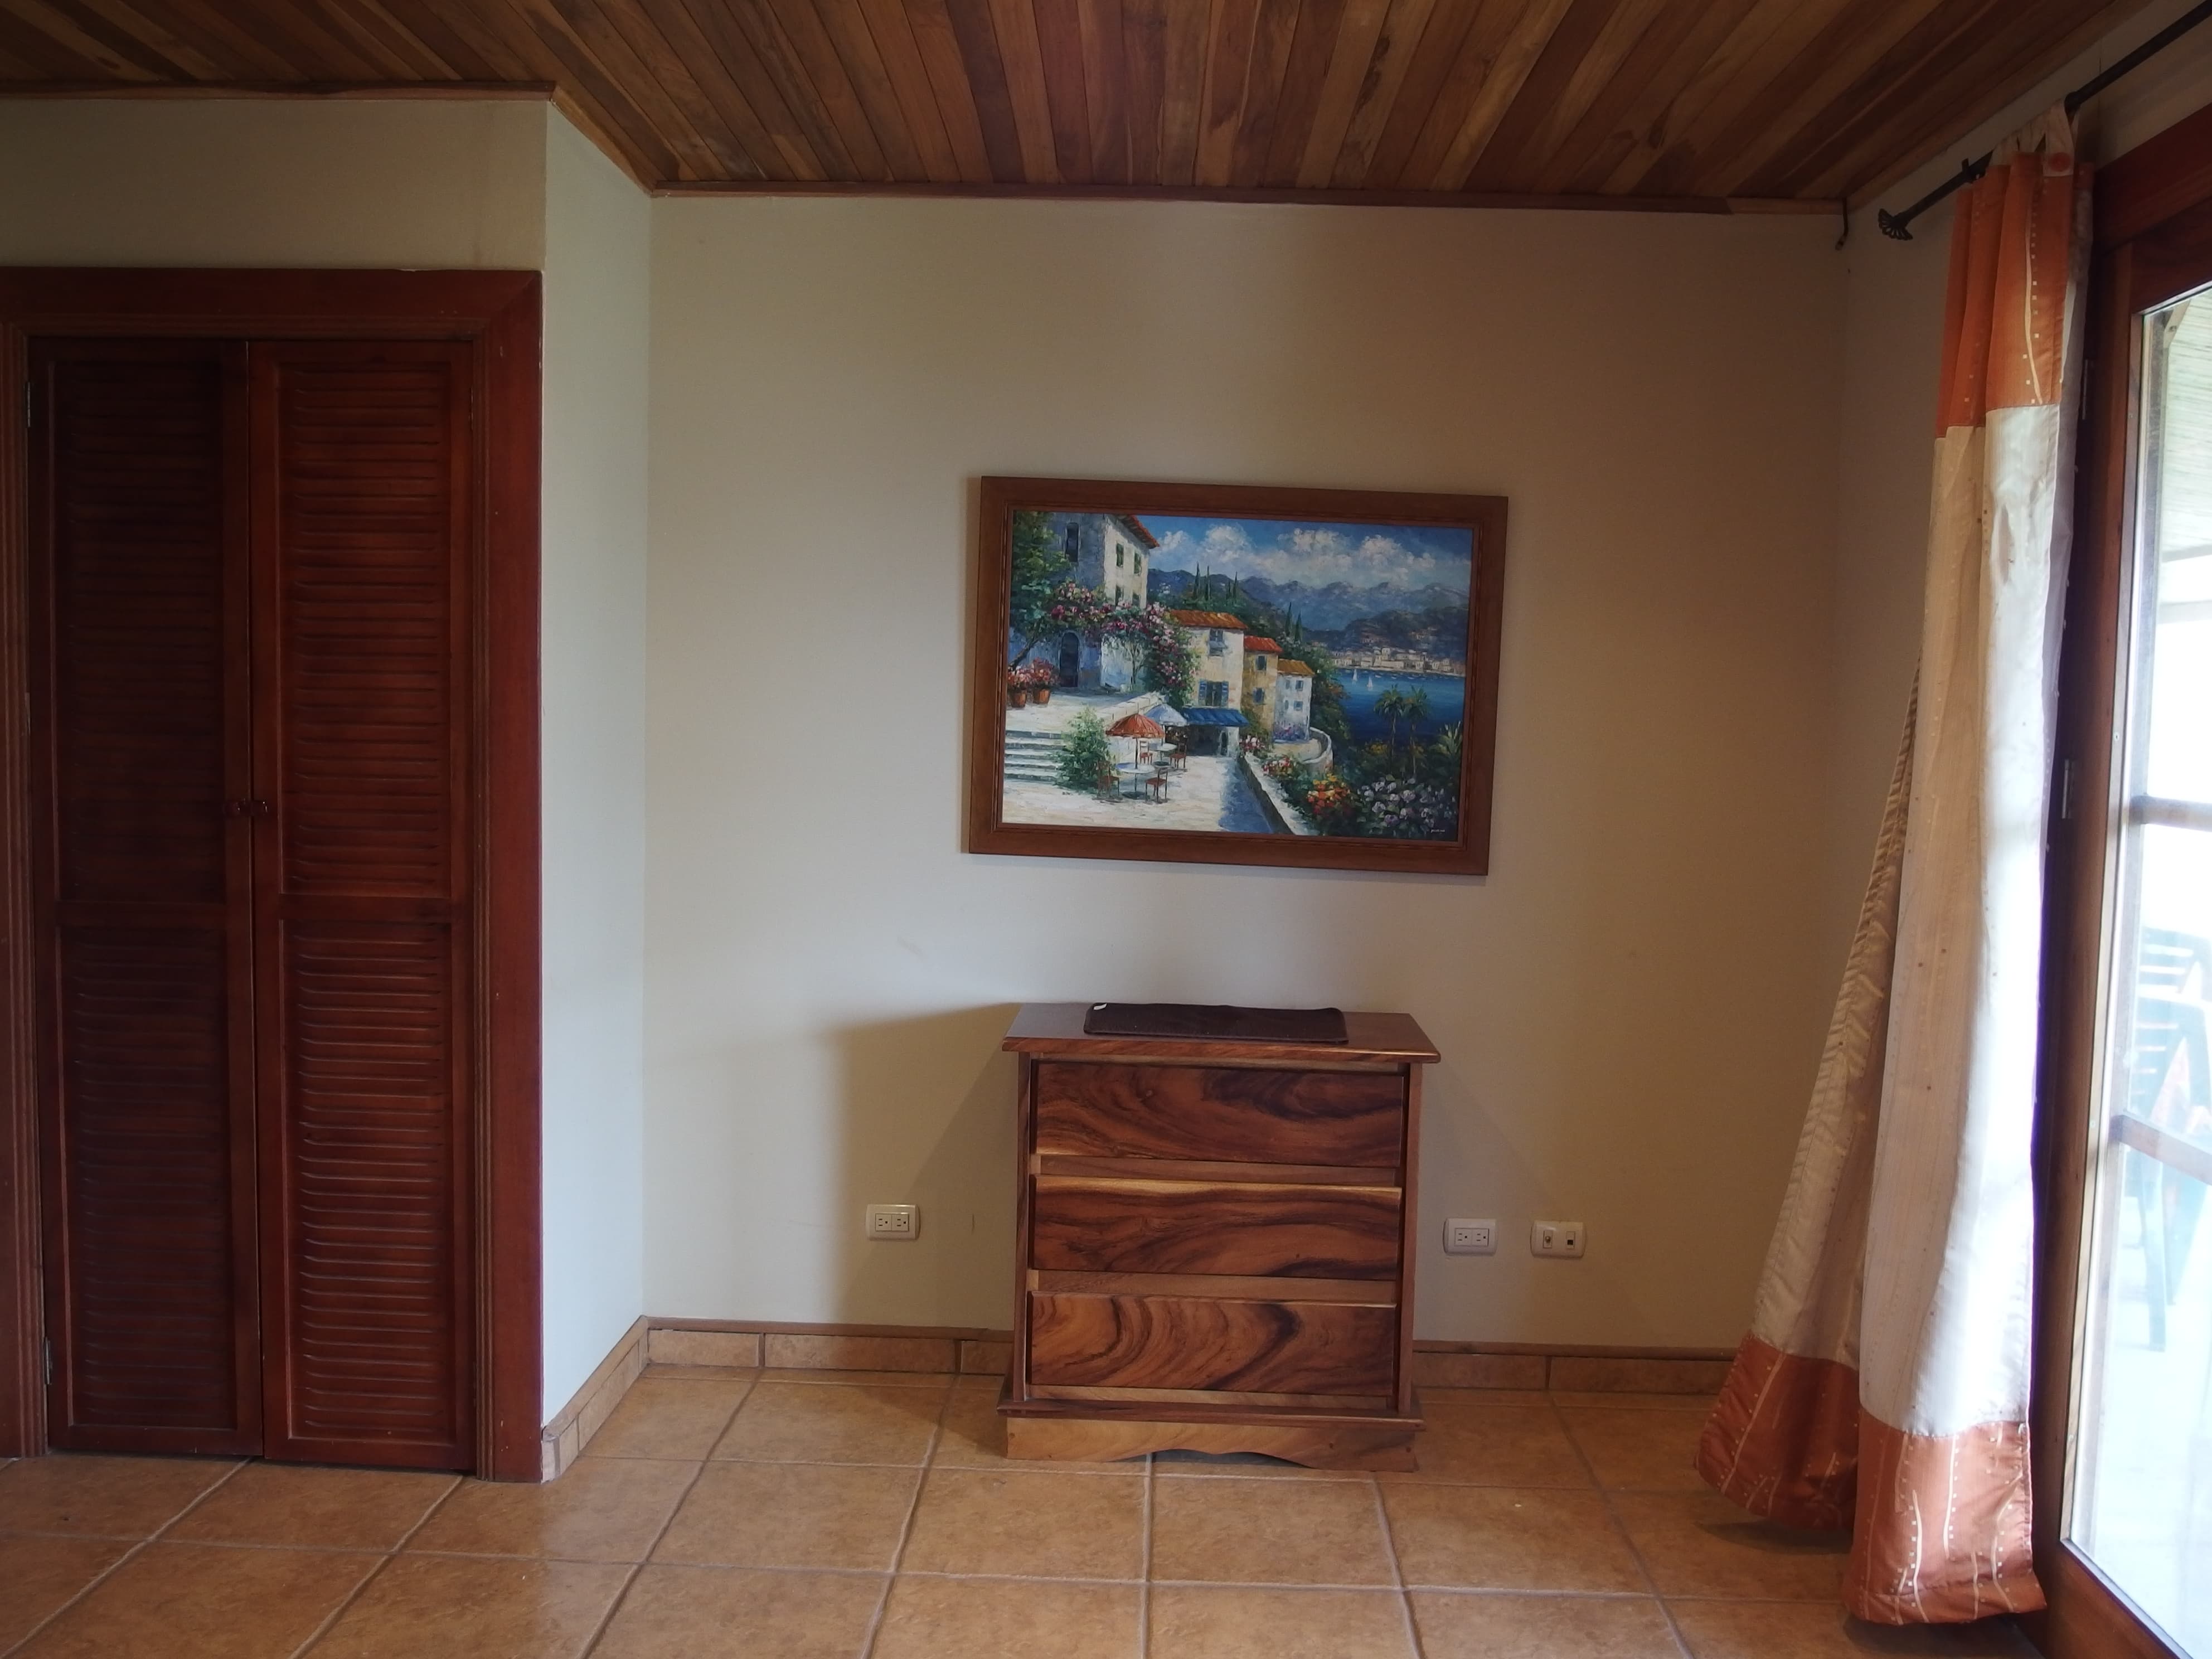 3 br home for sale costa rica